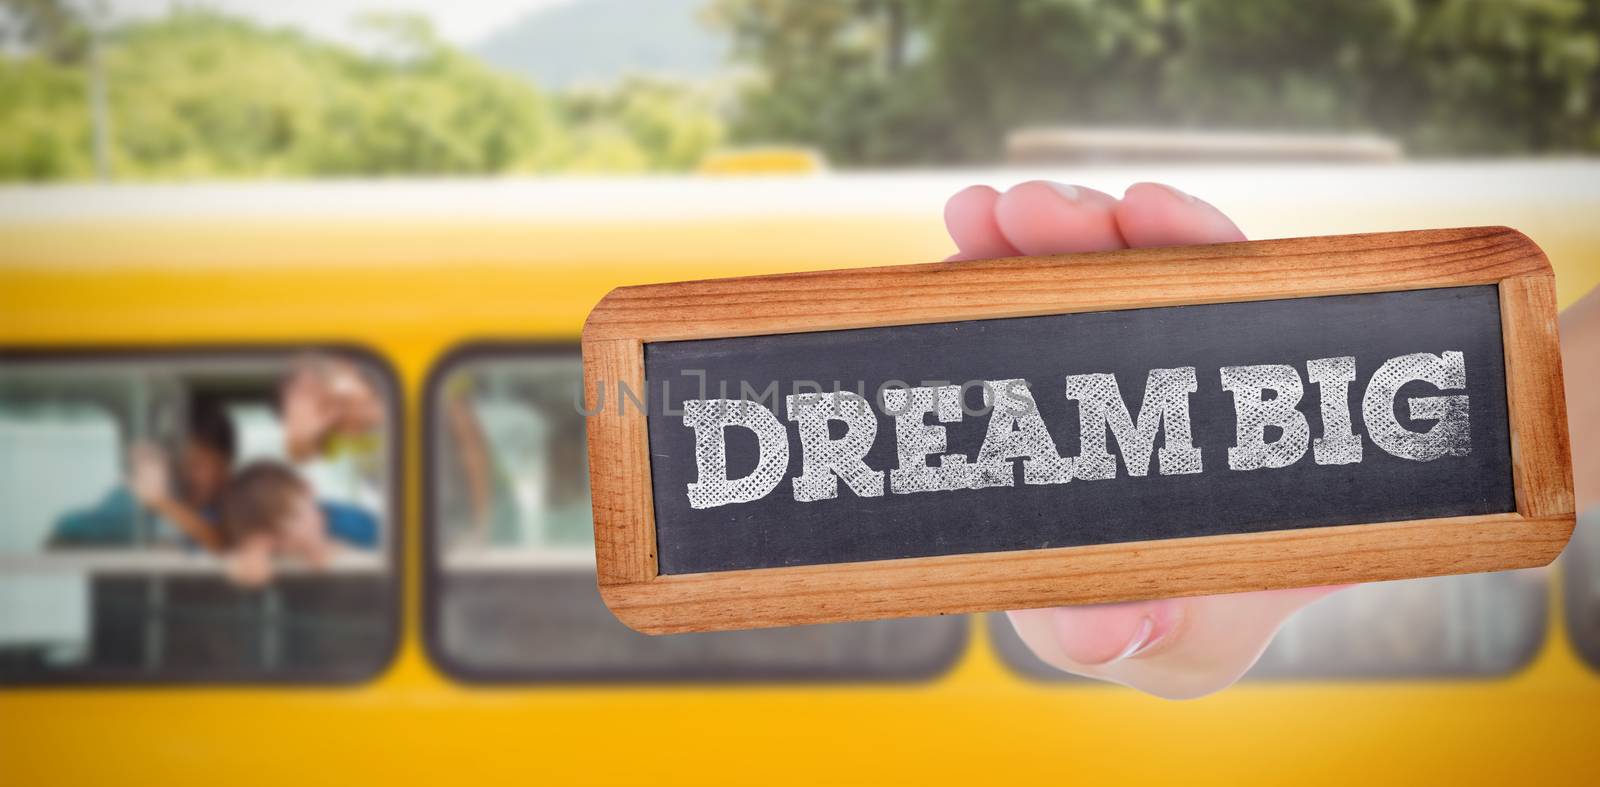 The word dream big and hand showing chalkboard against cute pupils smiling at camera in the school bus